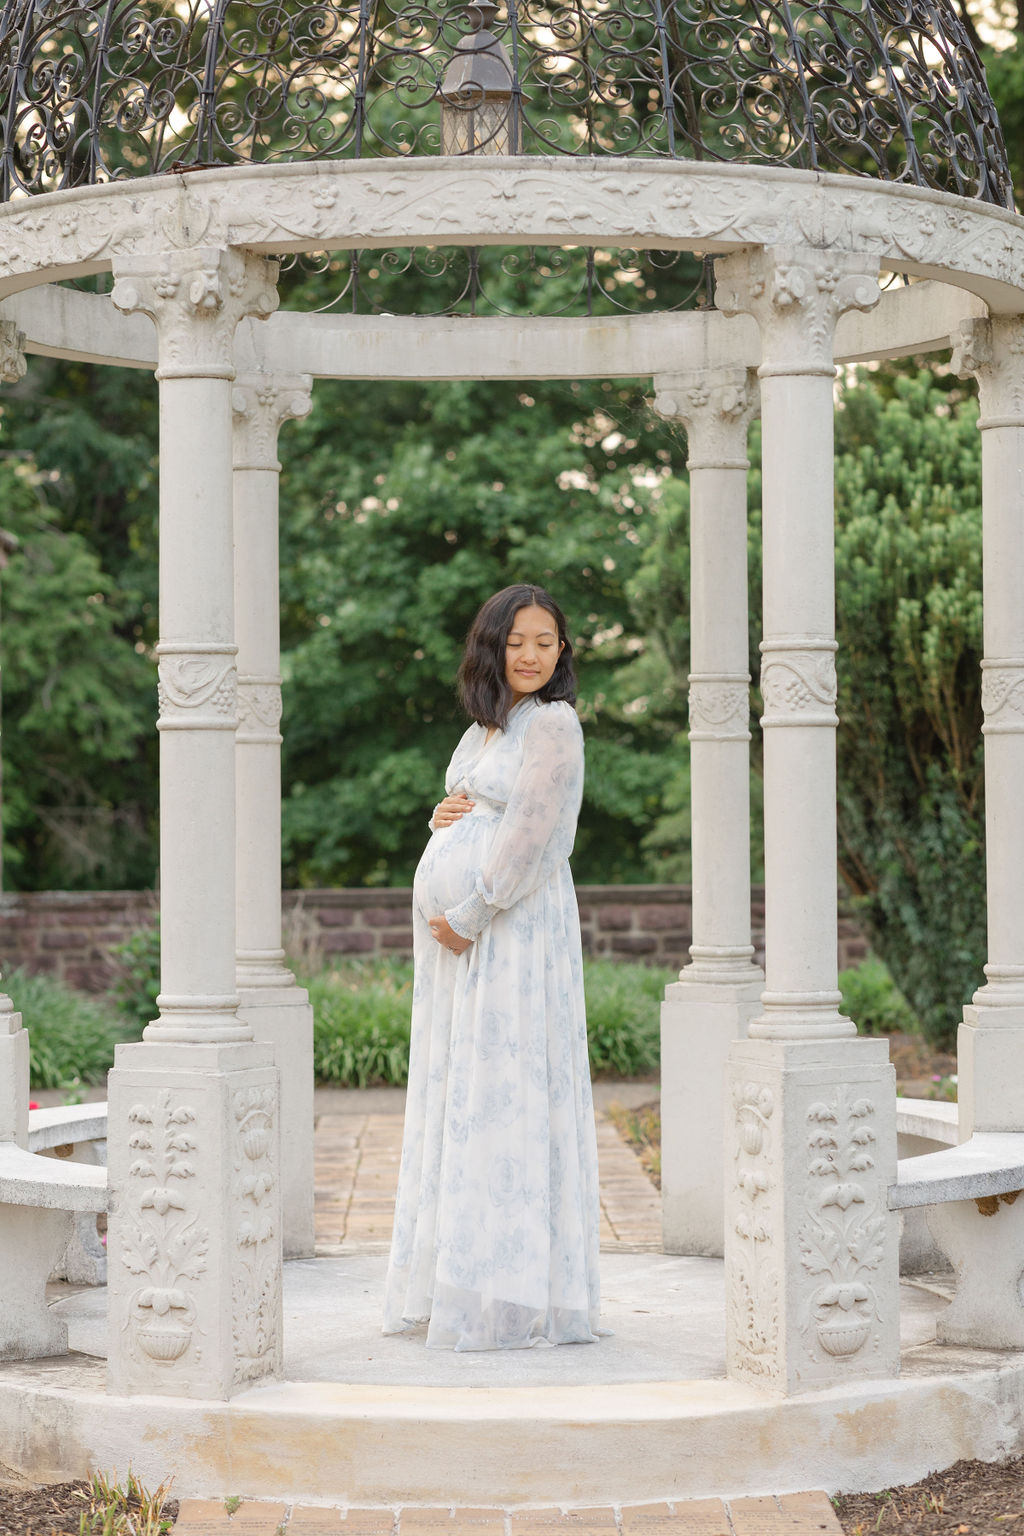 A mom to be in a blue maternity dress looks down her shoulder while standing in a garden gazebo philadelphia prenatal massage